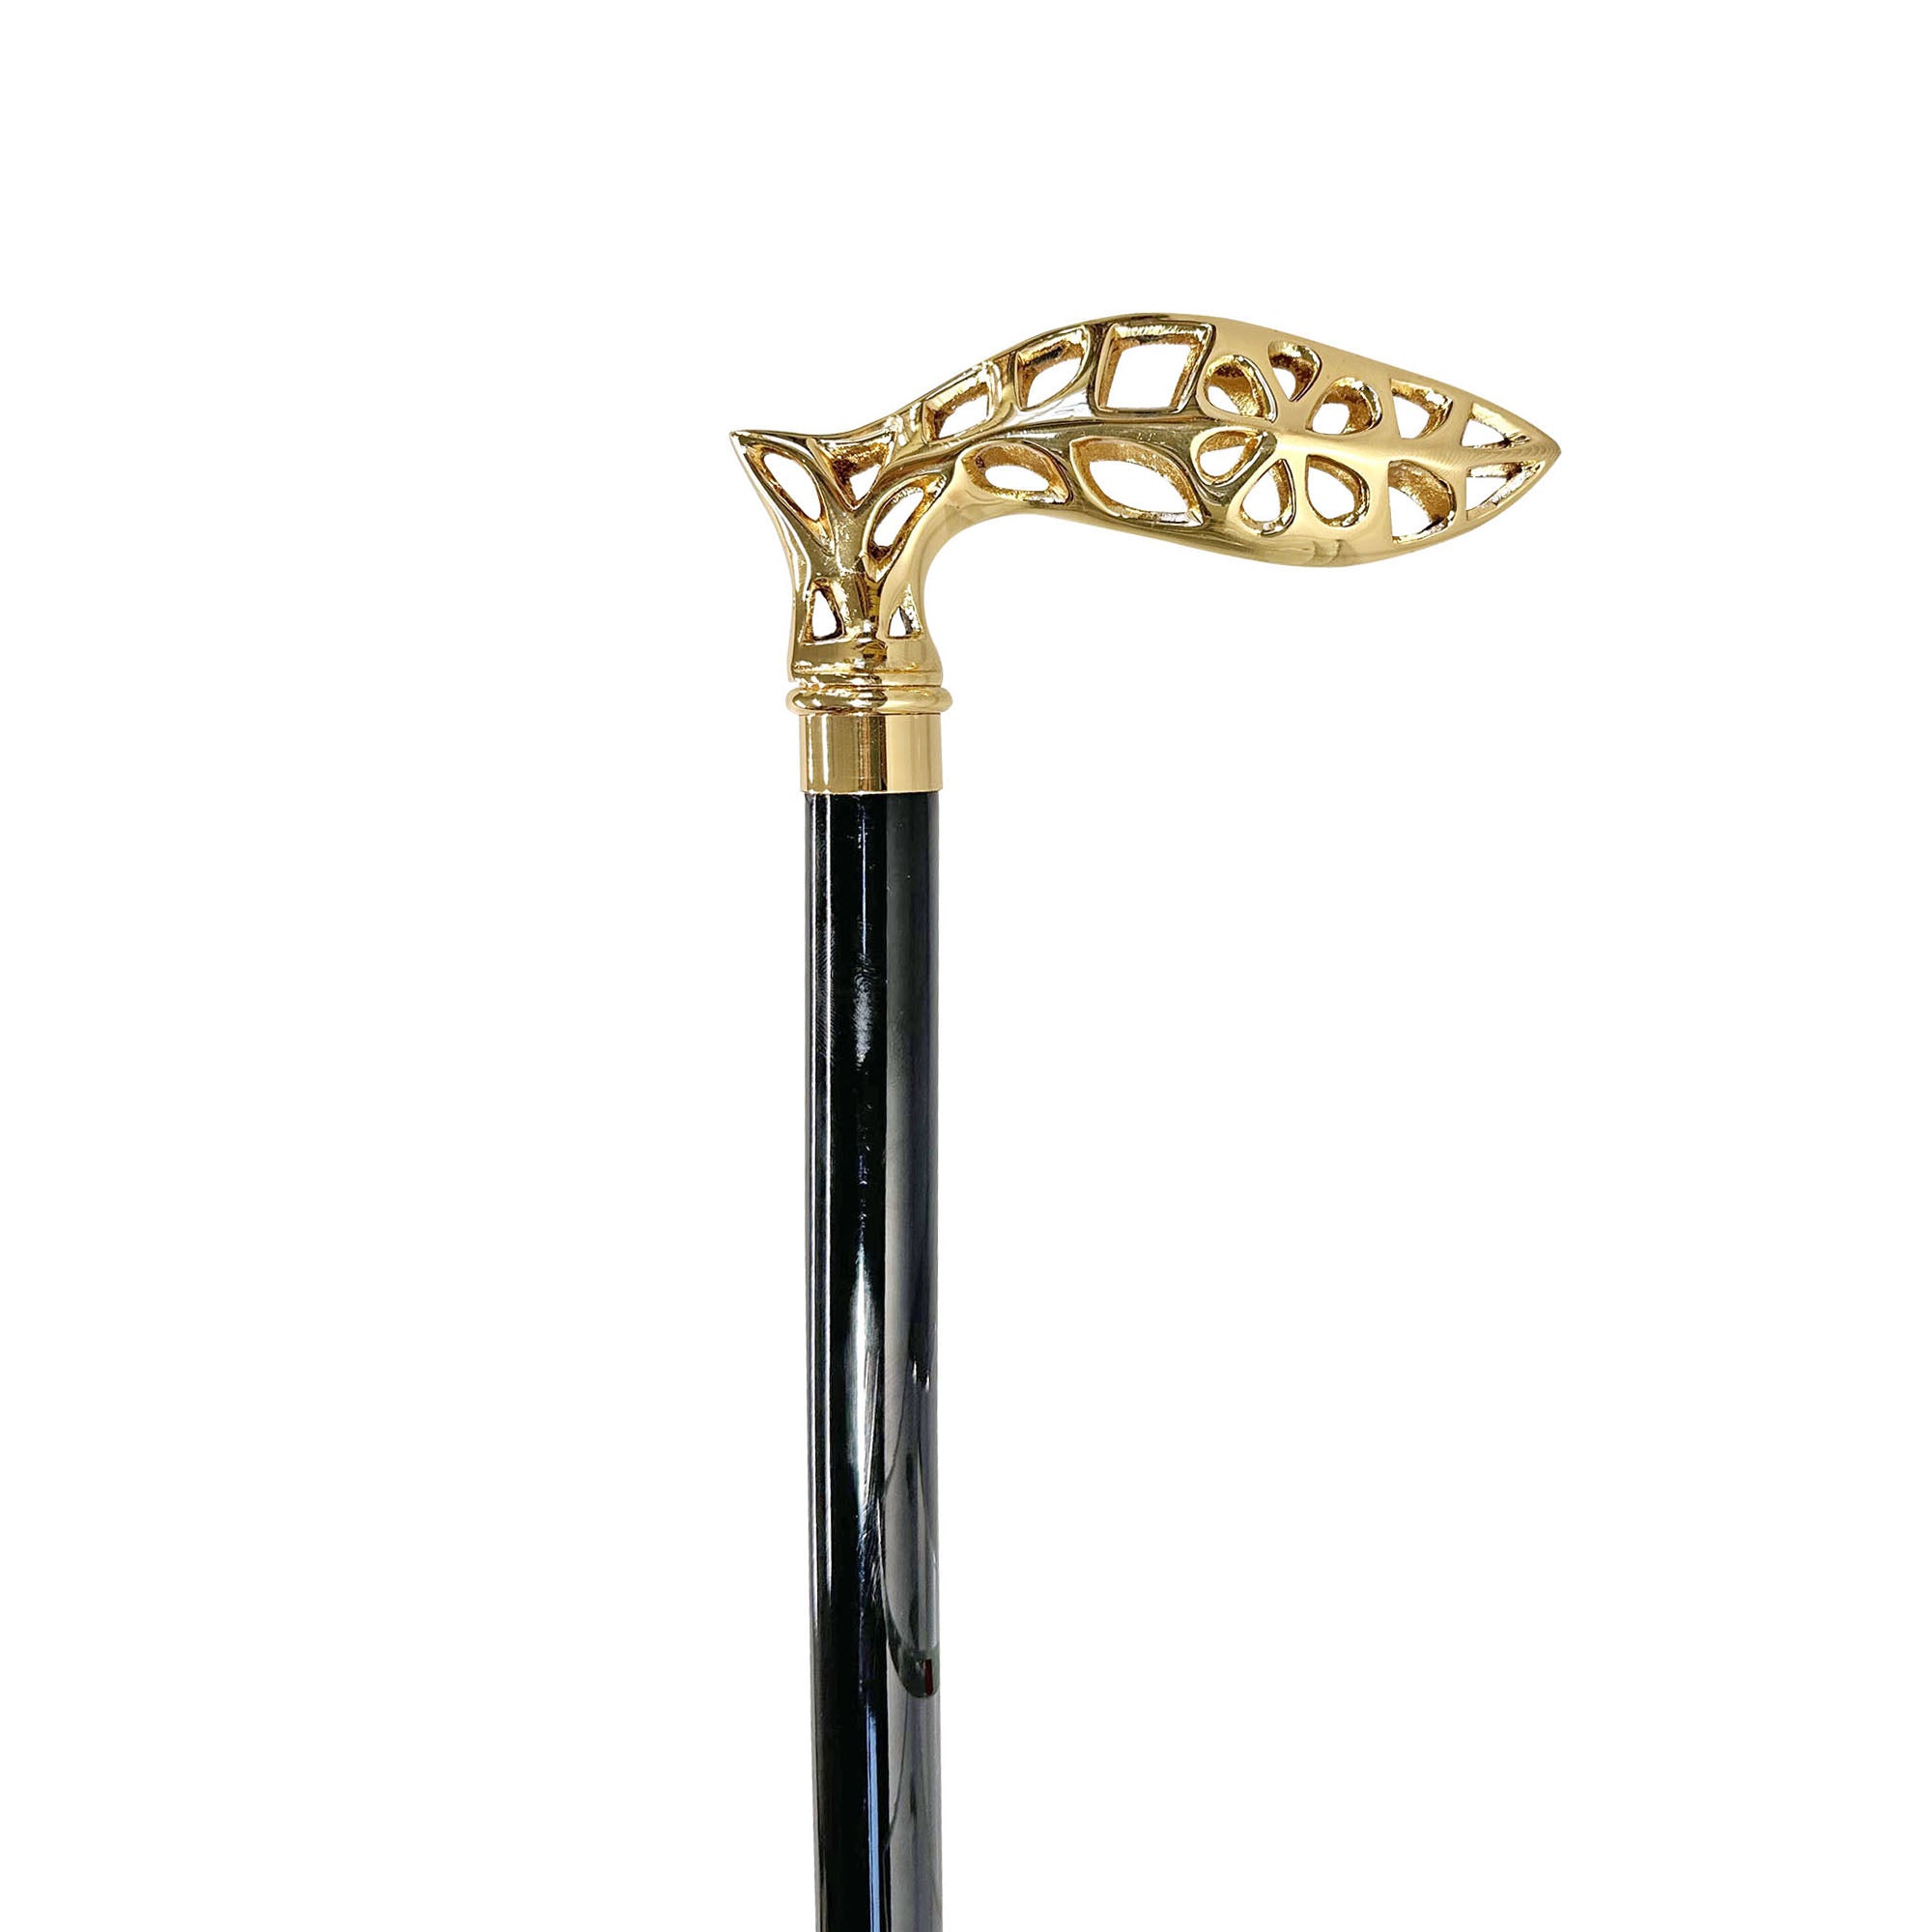 walking stick in perforated metal - 24K goldplated